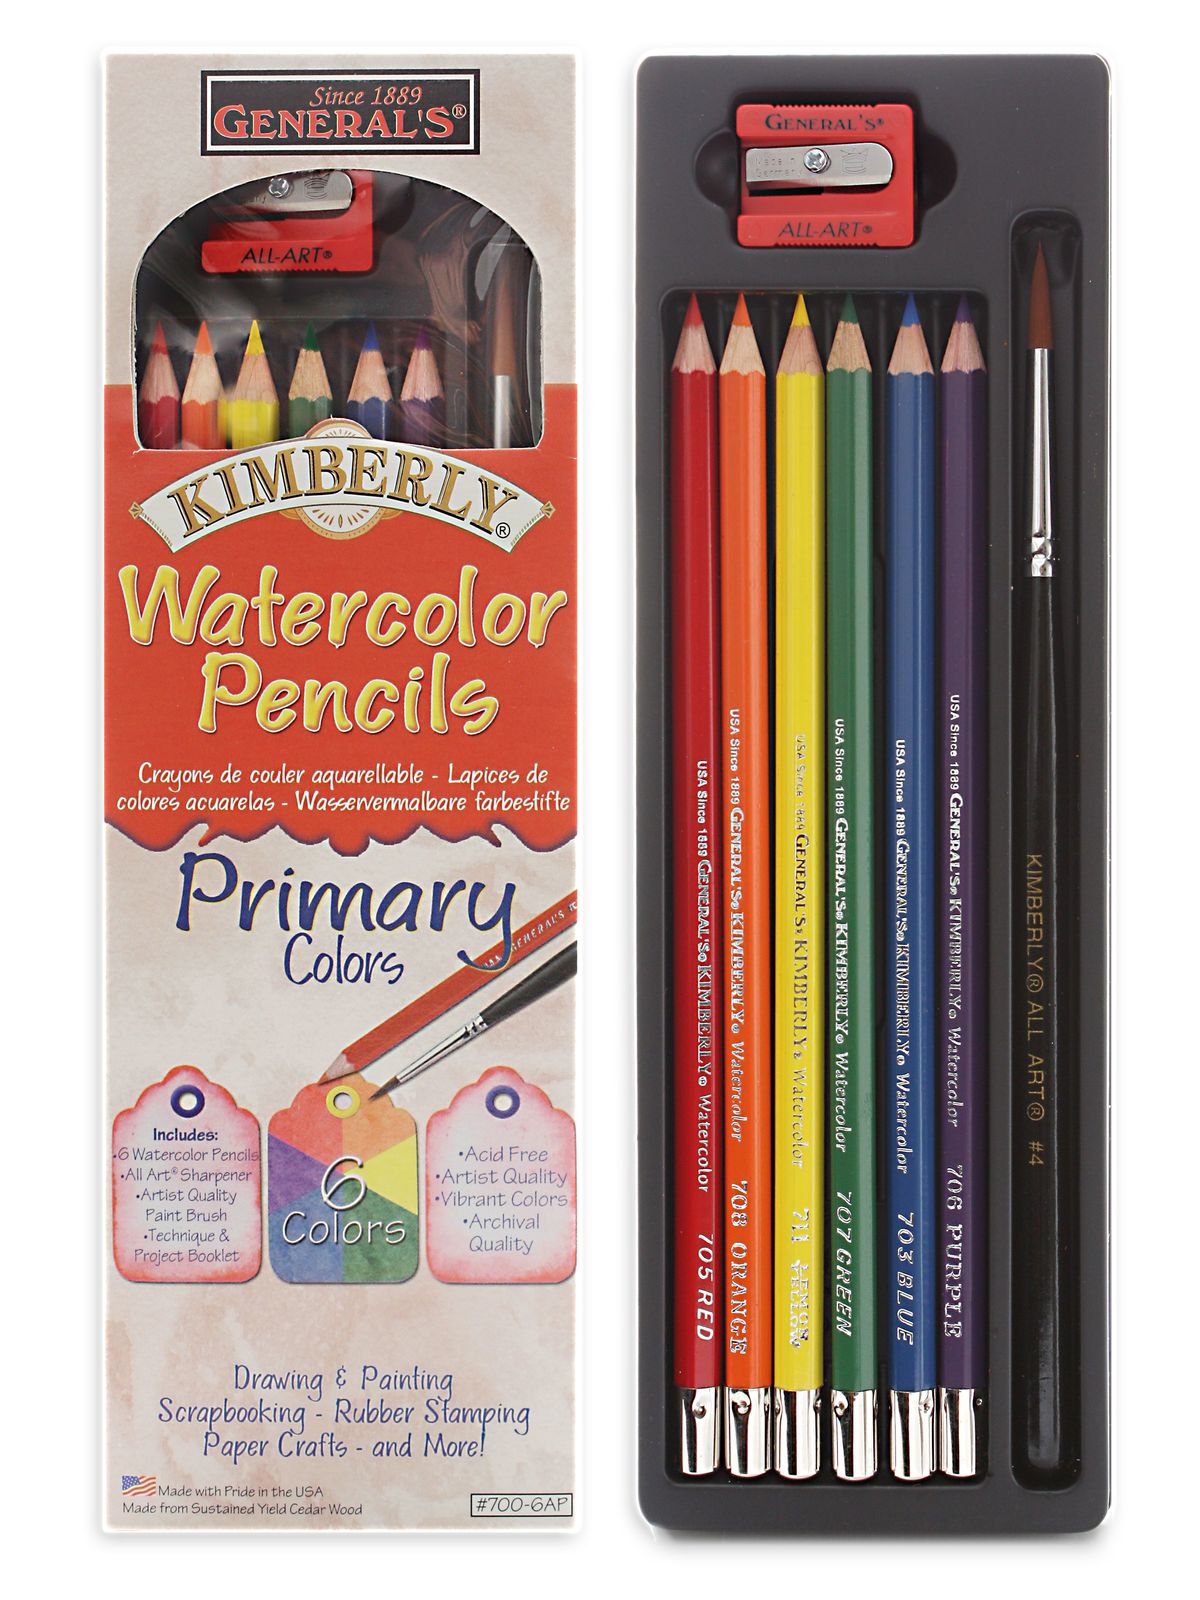 Kimberly Watercolor Pencils - Primary Colors Set Each